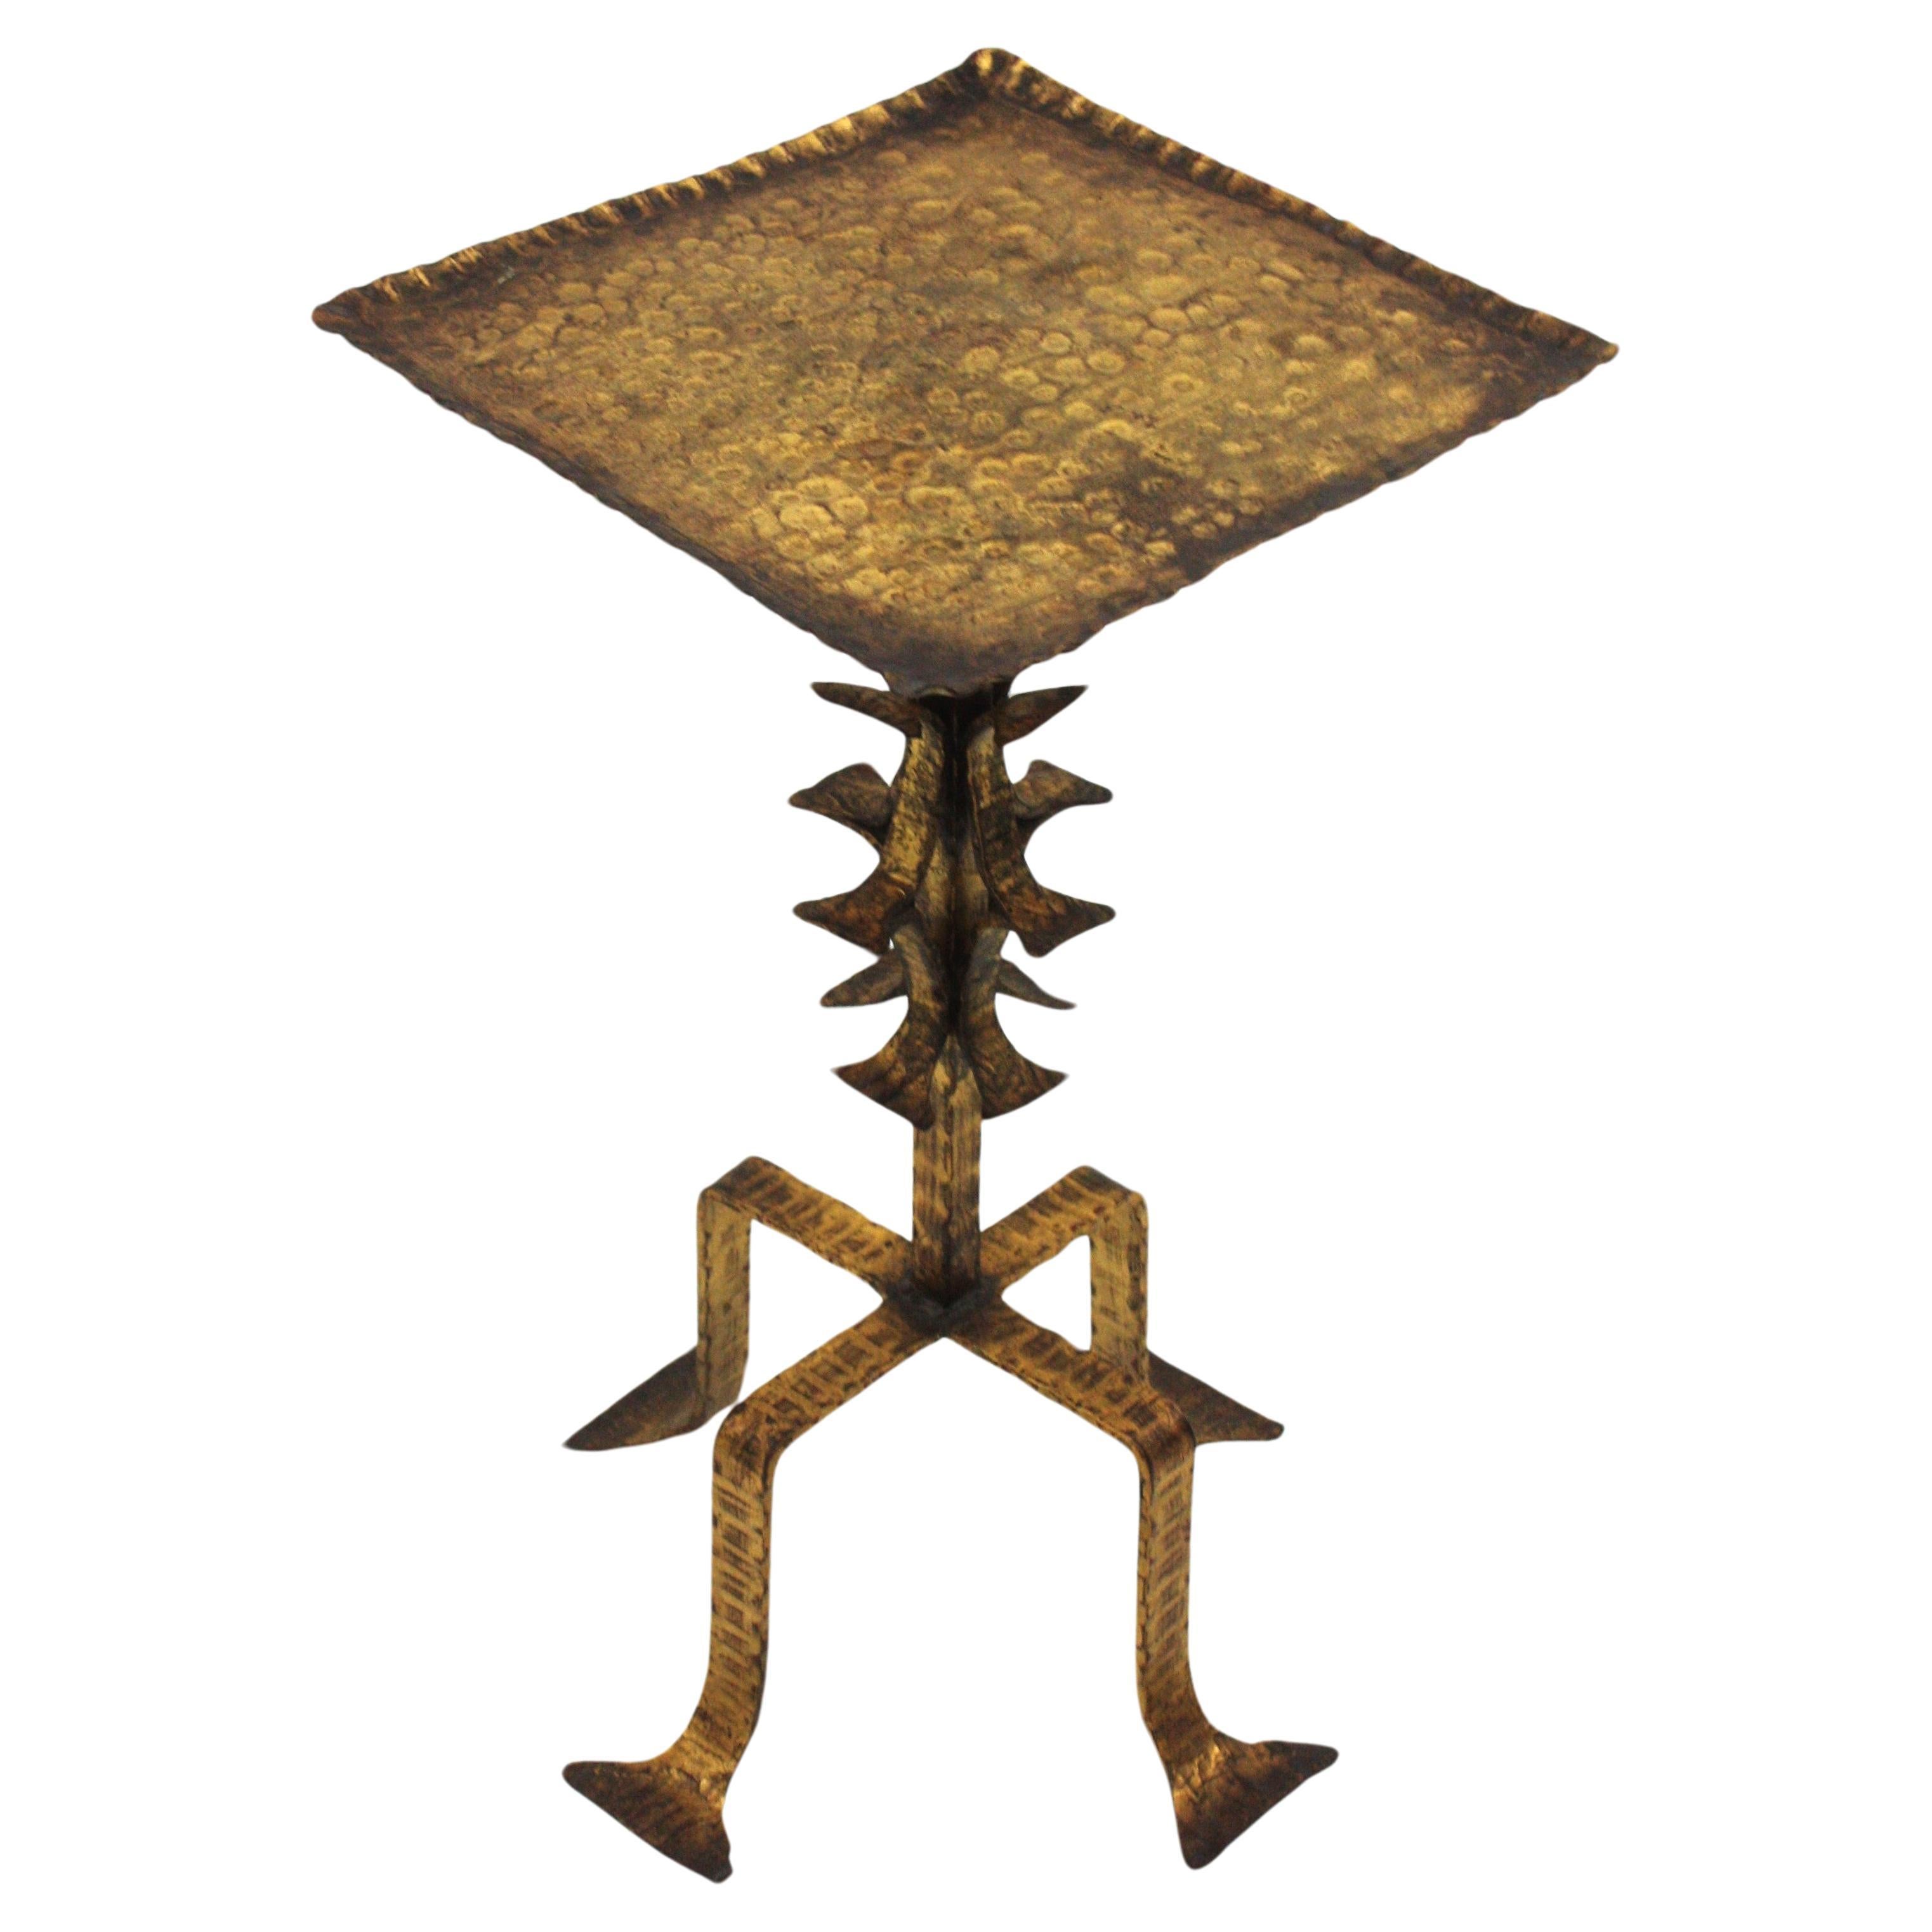 Hand Forged Gold Leaf Gilt Iron Martini Table by Ferro Art, Spain, 1940s-1950s
One of a kind hand wrought Spanish Gilt Iron Drink Table Gueridon, End or Side Table. Entirely made by hand.
This hand-crafted table was manufactured by a well-known